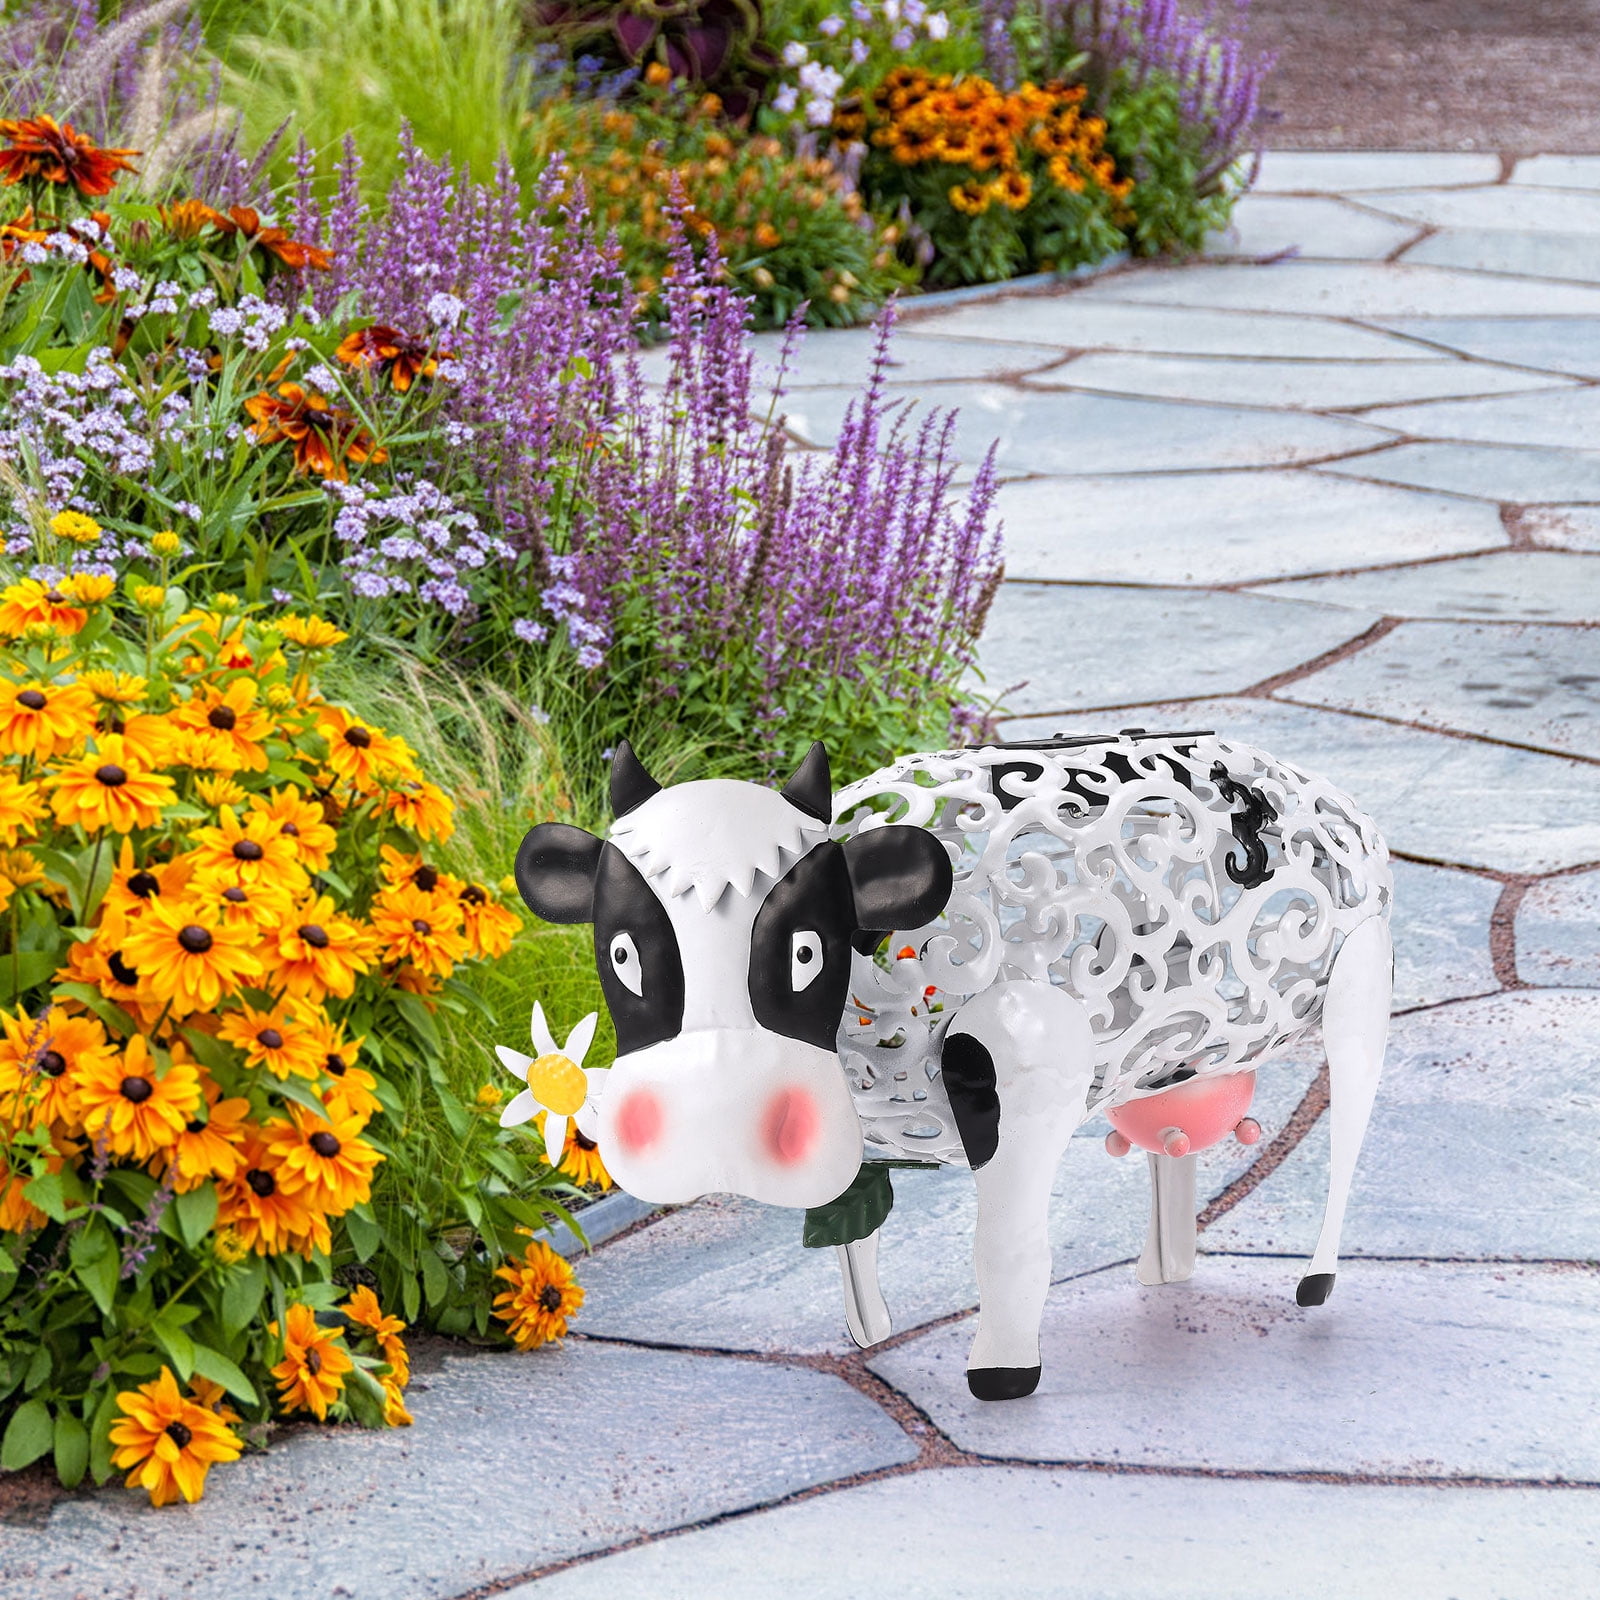 Hapeisy Cow Decor, Solar Garden Daisy Cow Light, Lawn Landscape Outdoor Led  Decor Color Changing Light，Can Be Used for Garden Decoration, Home Decor, 